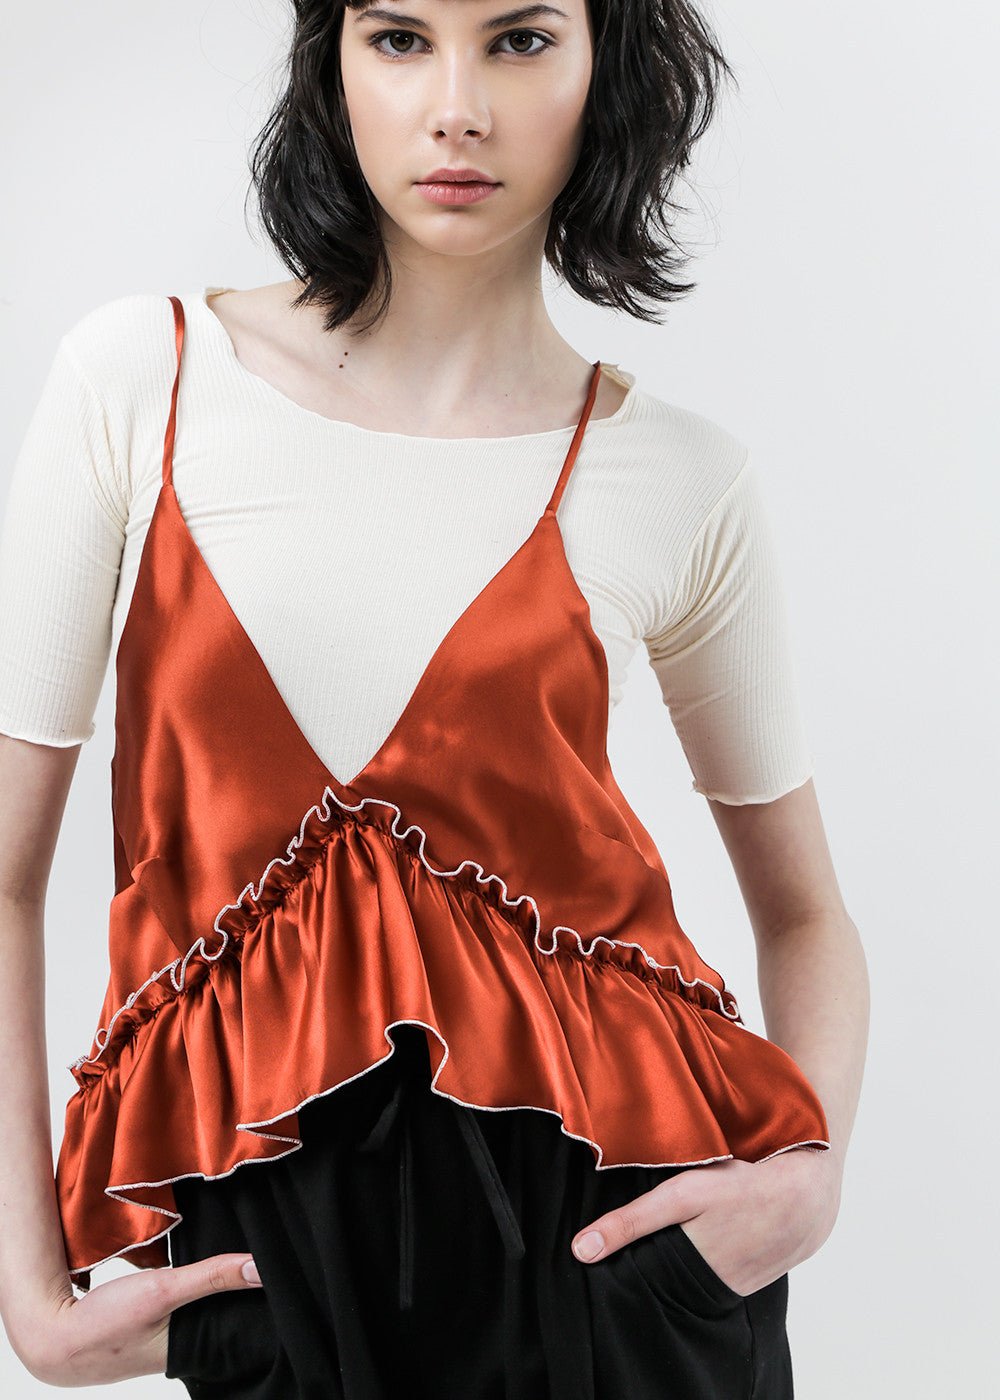 Arcana NYC Paprika Lilith Convertible Slip Dress - New Classics Studios Sustainable Ethical Fashion Canada